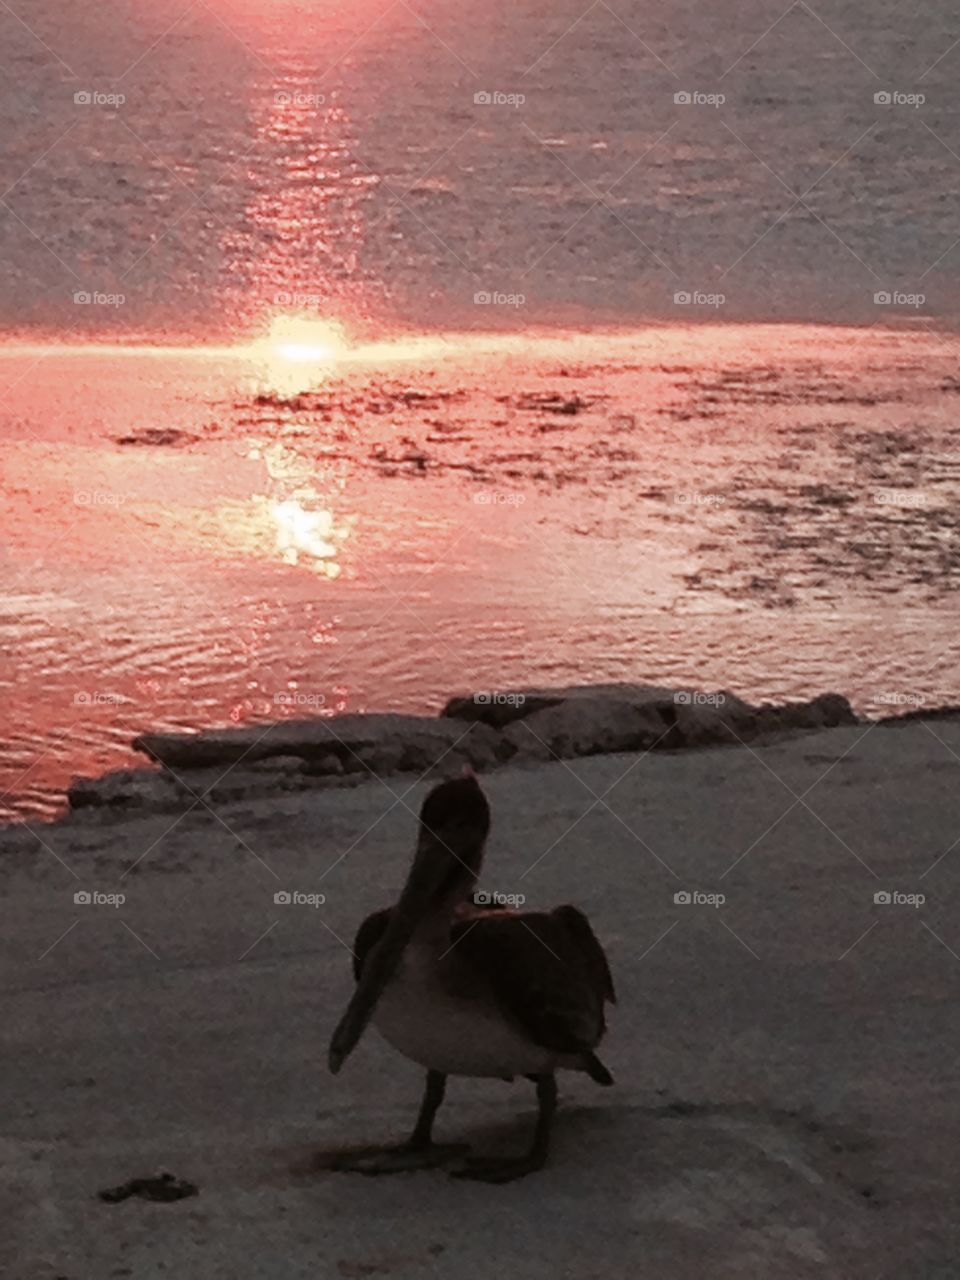 Oceanside sunset with pelican